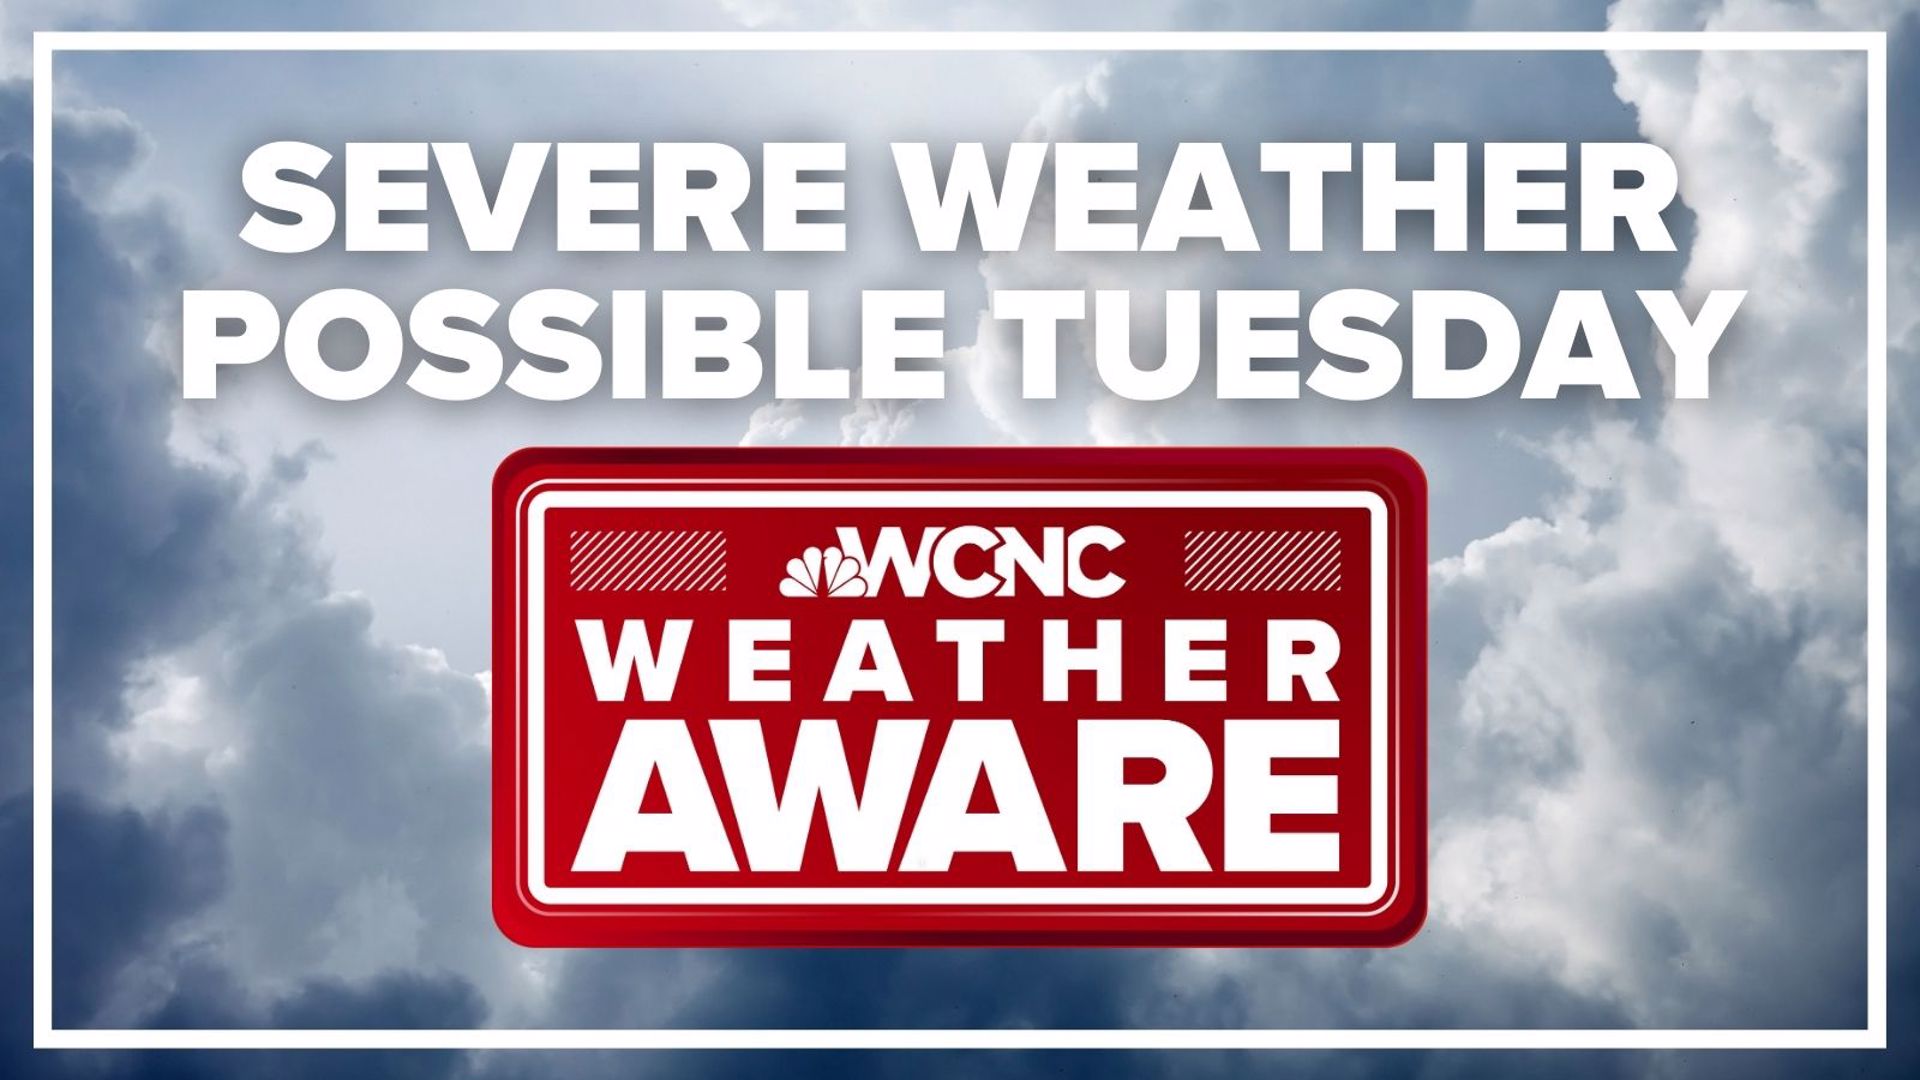 Meteorologist Chris Mulcahy and forecaster Larry Sprinkle are tracking the threat of severe weather in the Carolinas Tuesday afternoon.